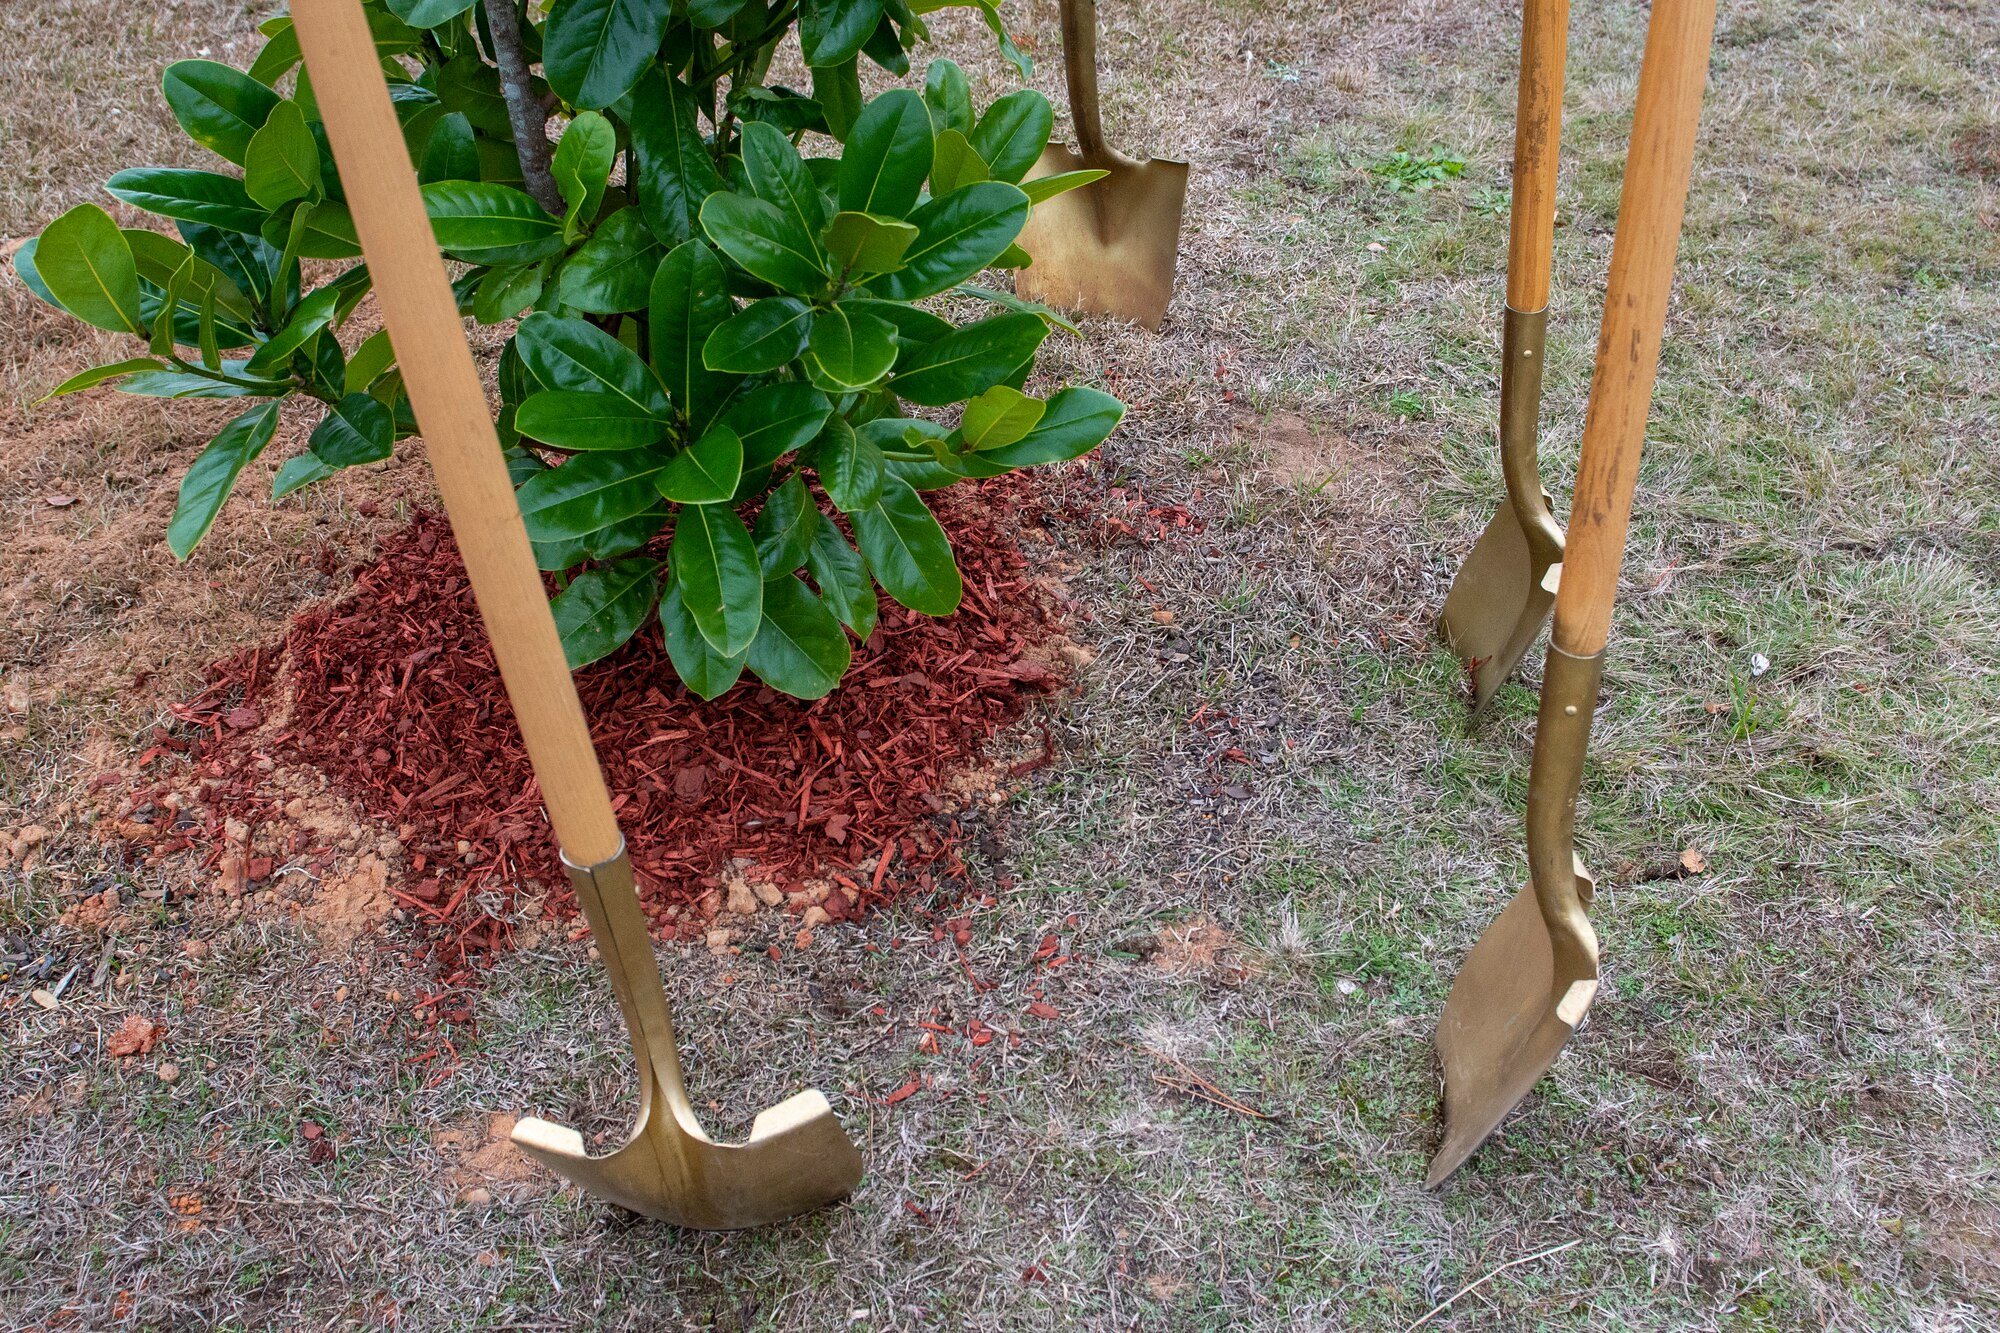 Photo shovels in the dirt around a tree.